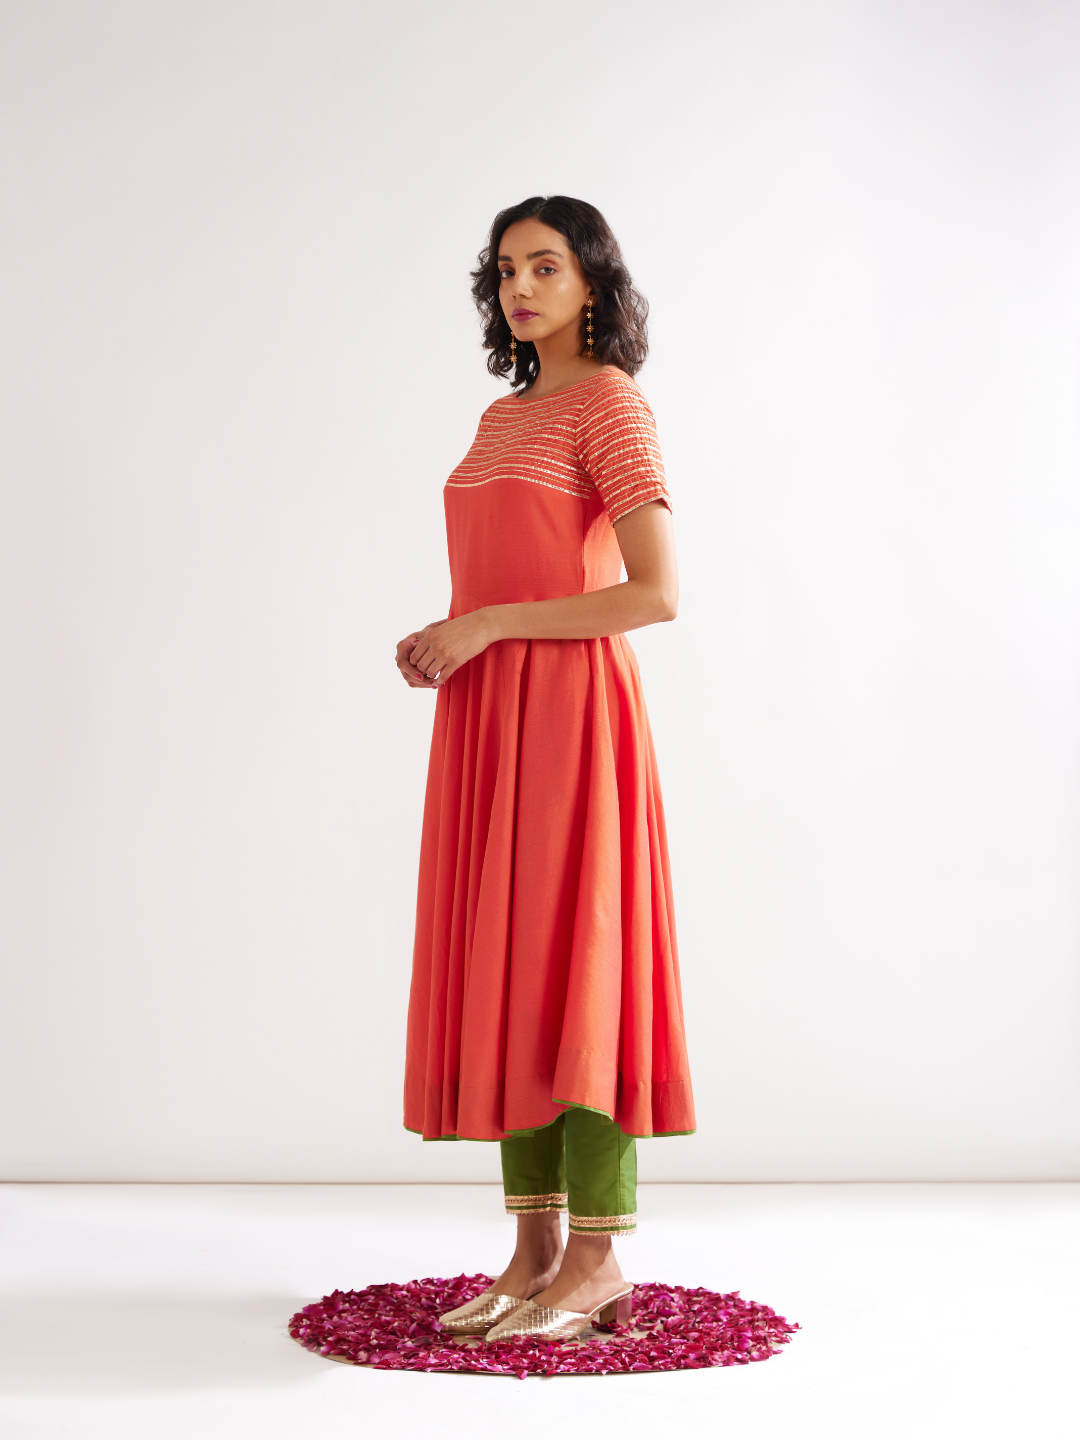 Circular panelled Kurta highlighted with Gota patti yoke paired with pegged pants along with dupatta- Spicy Orange